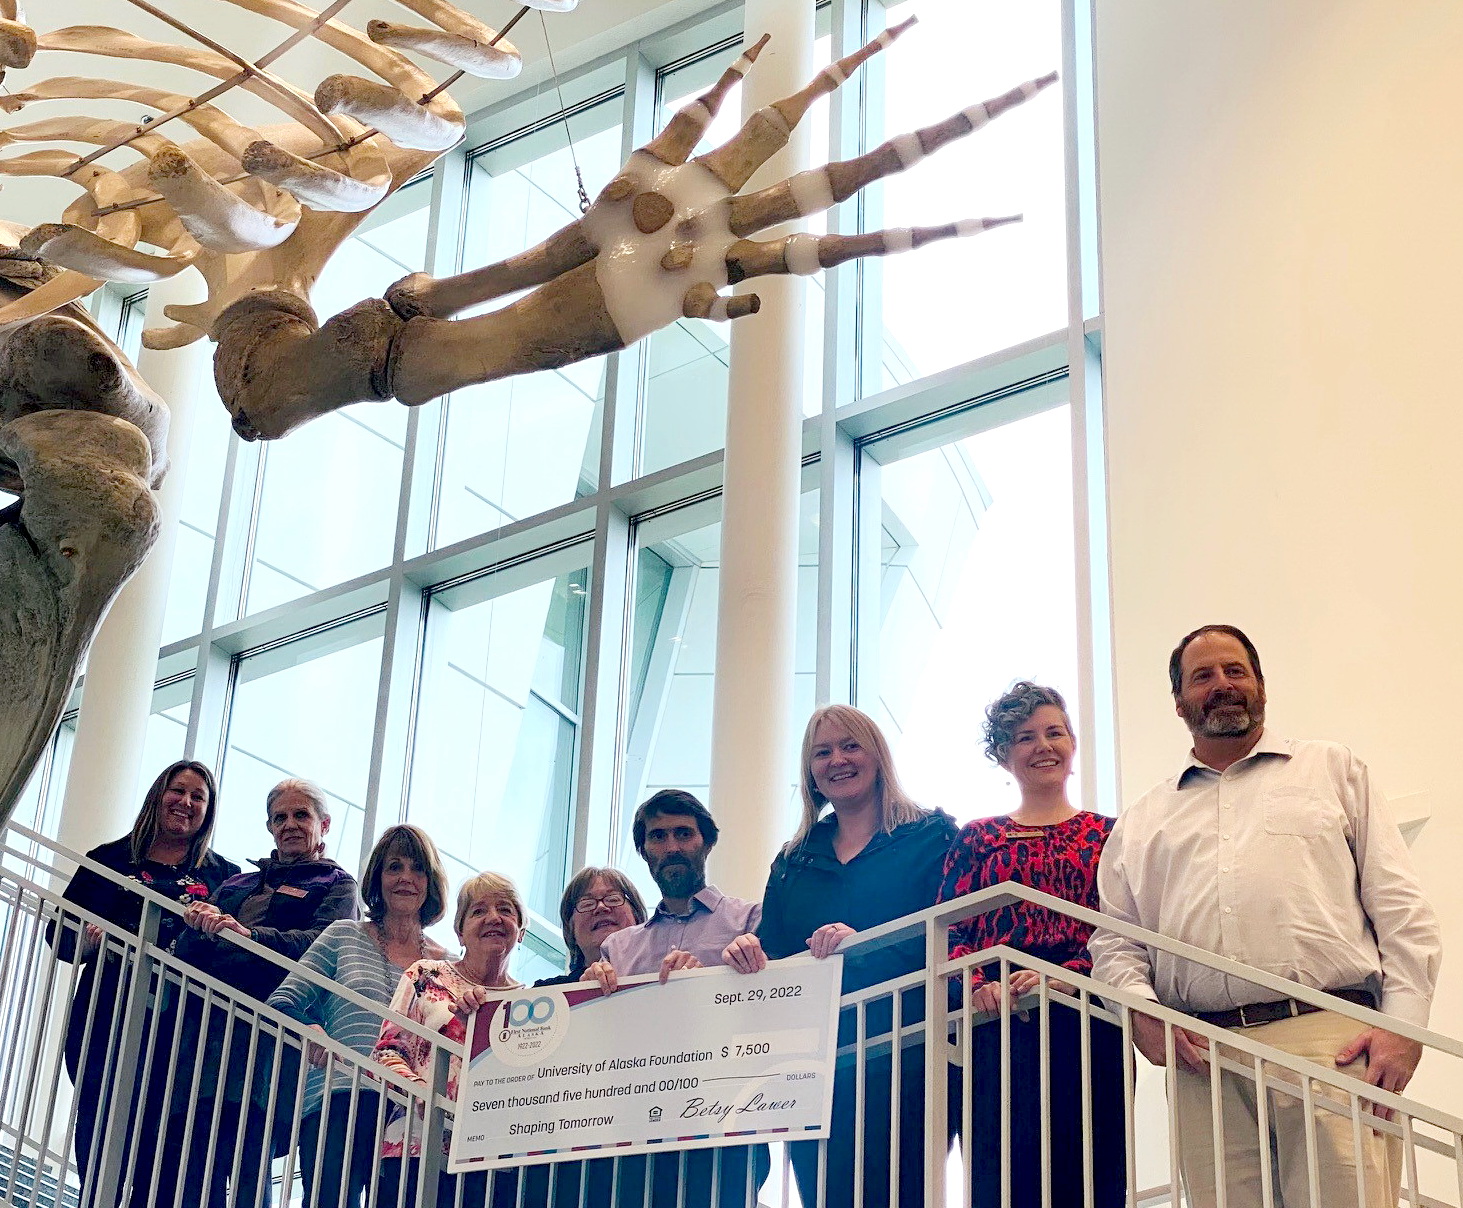 First National Bank Alaska donates $7,500 to University of Alaska Fairbanks to support RAHI and the Museum of the North